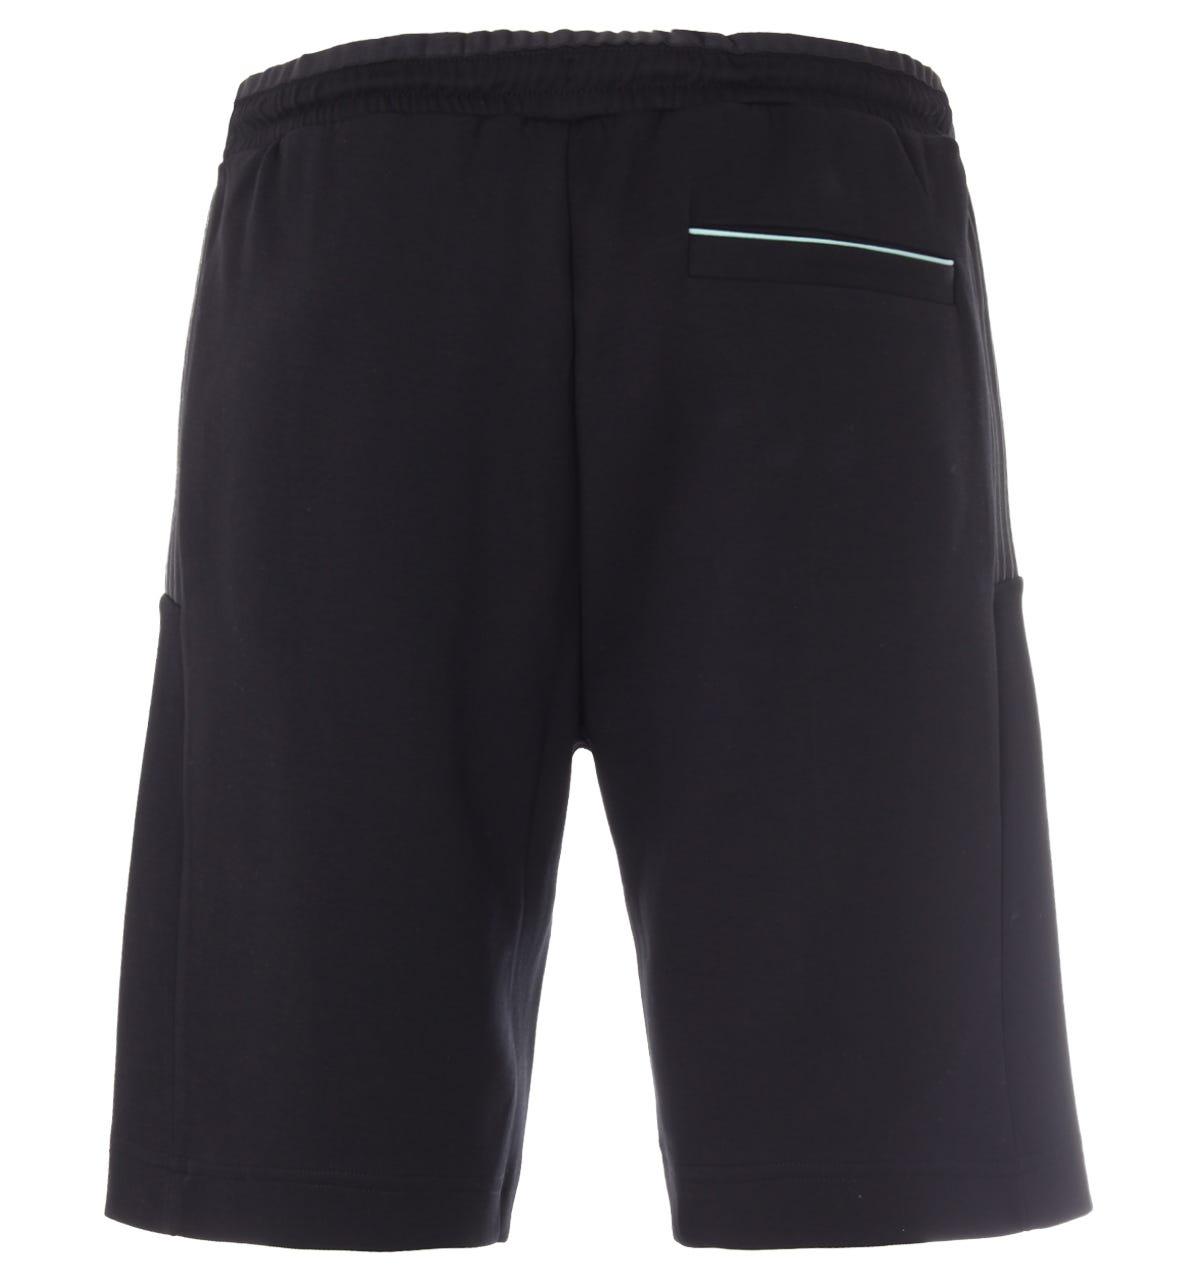 gym and workout clothes Sweatshorts BOSS by HUGO BOSS Headlo Shorts in Black for Men Mens Clothing Activewear 